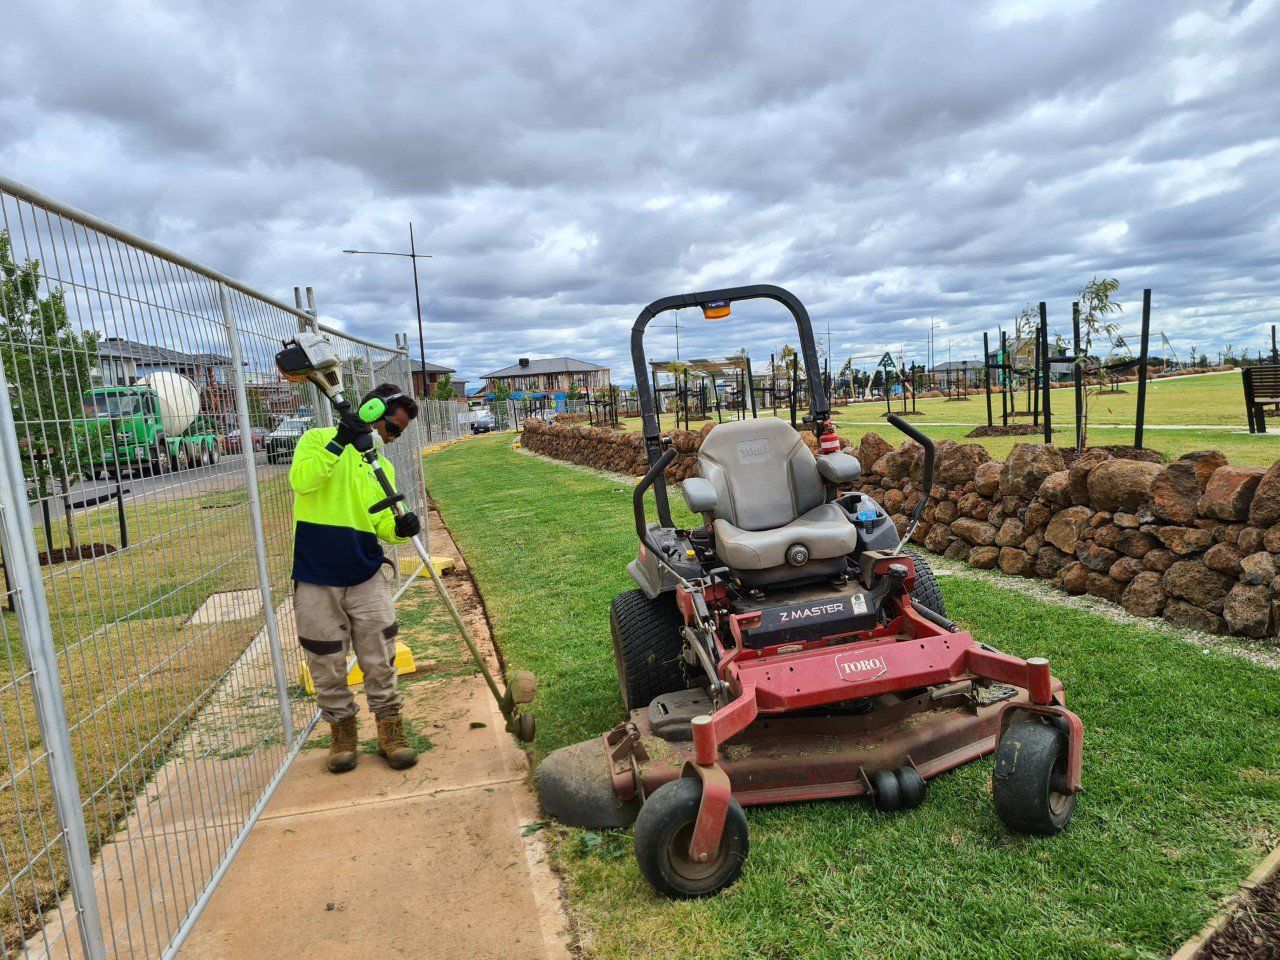 Gardener working next to a ride on mower while using a whipper snipper